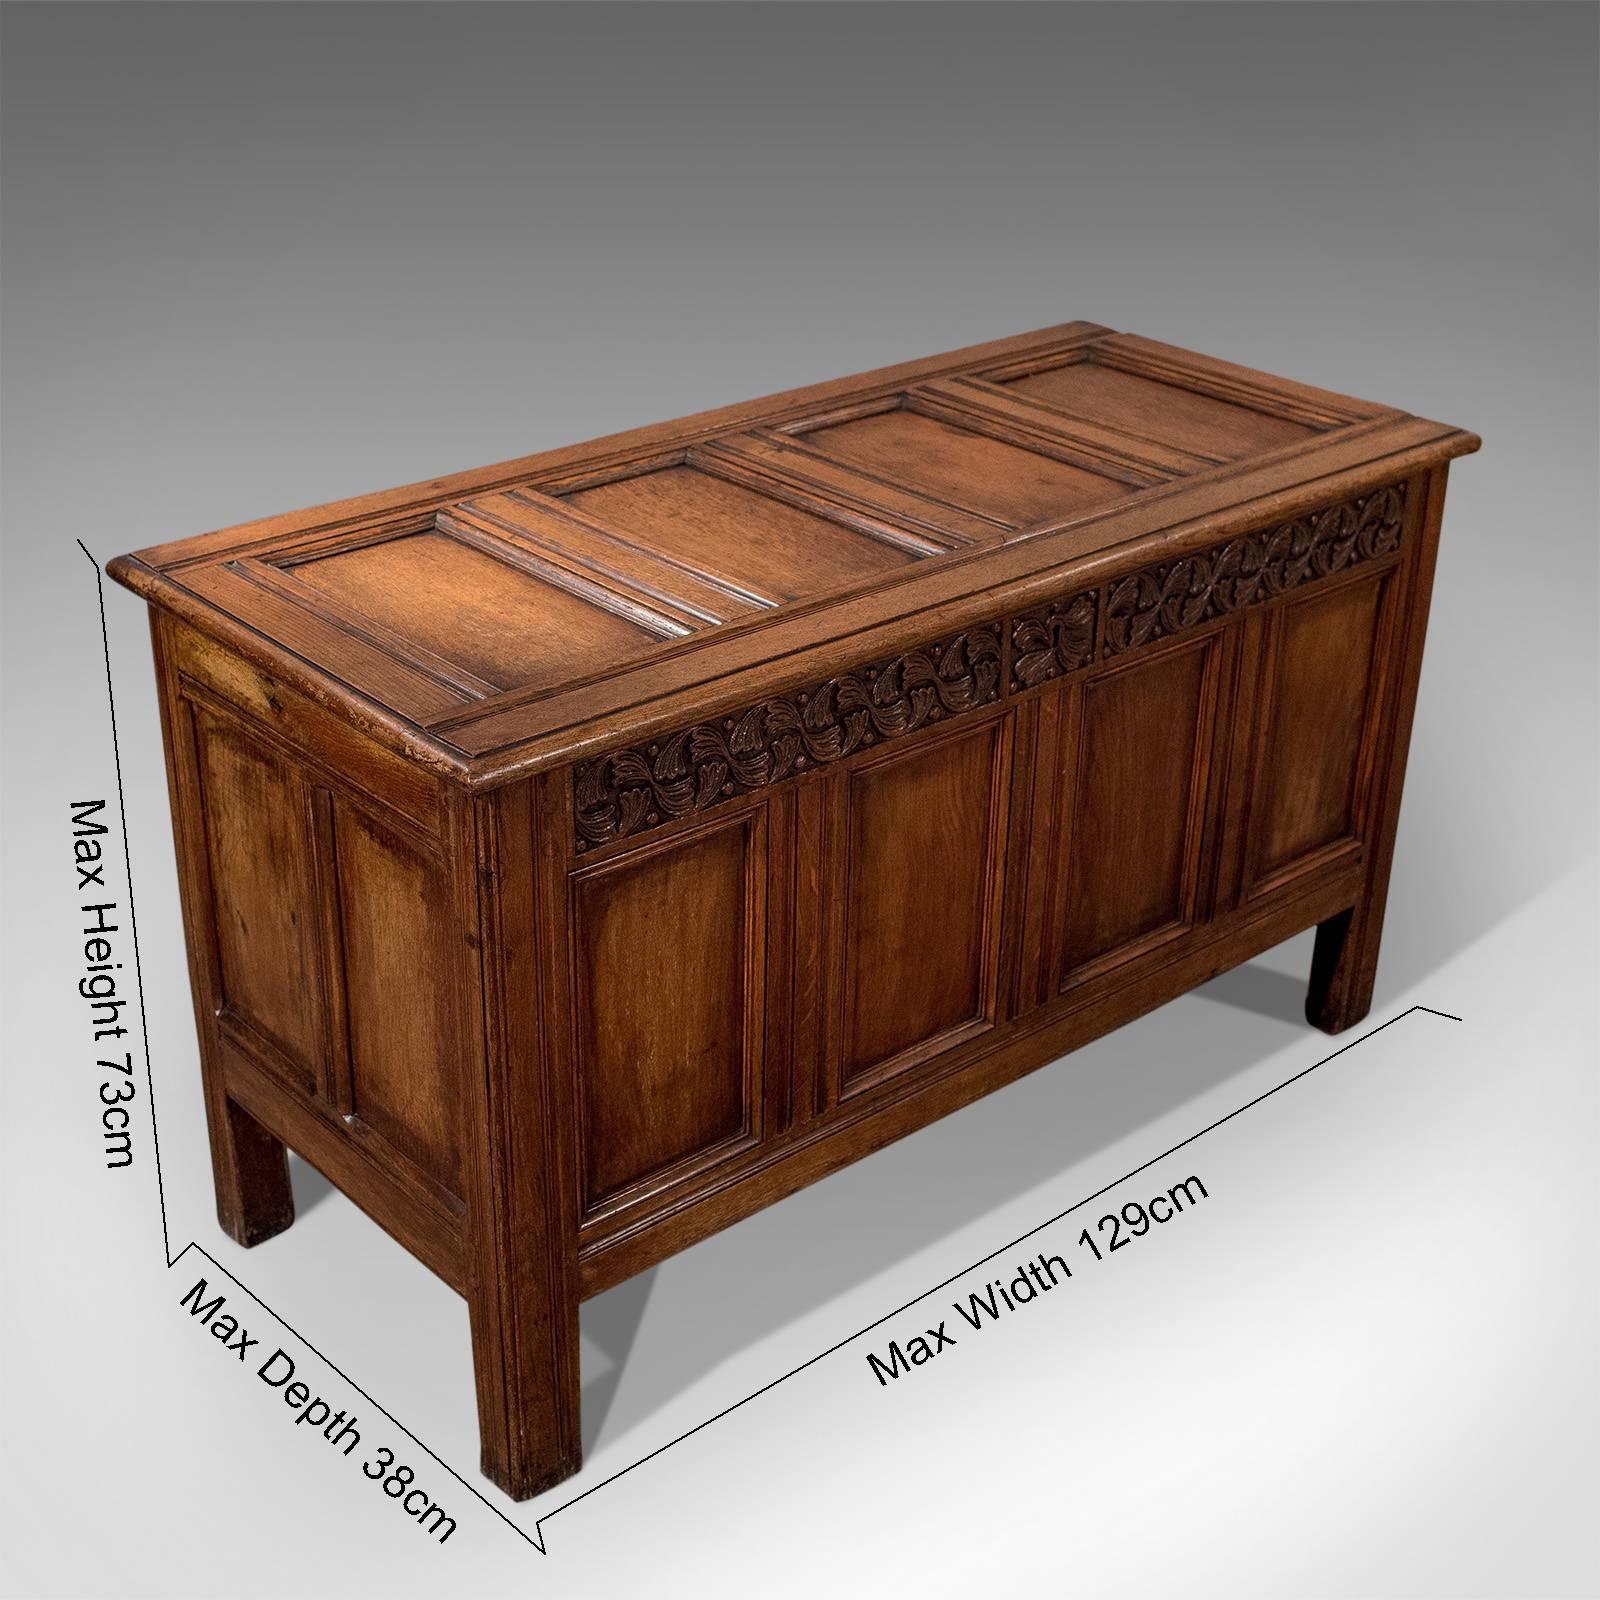 A most pleasing Georgian coffer chest presented in good antique condition
With Classic four field-panel front
Delightfully dressed with geometric foliate carved detailing to the front frieze
Generous in size offering practical storage with good